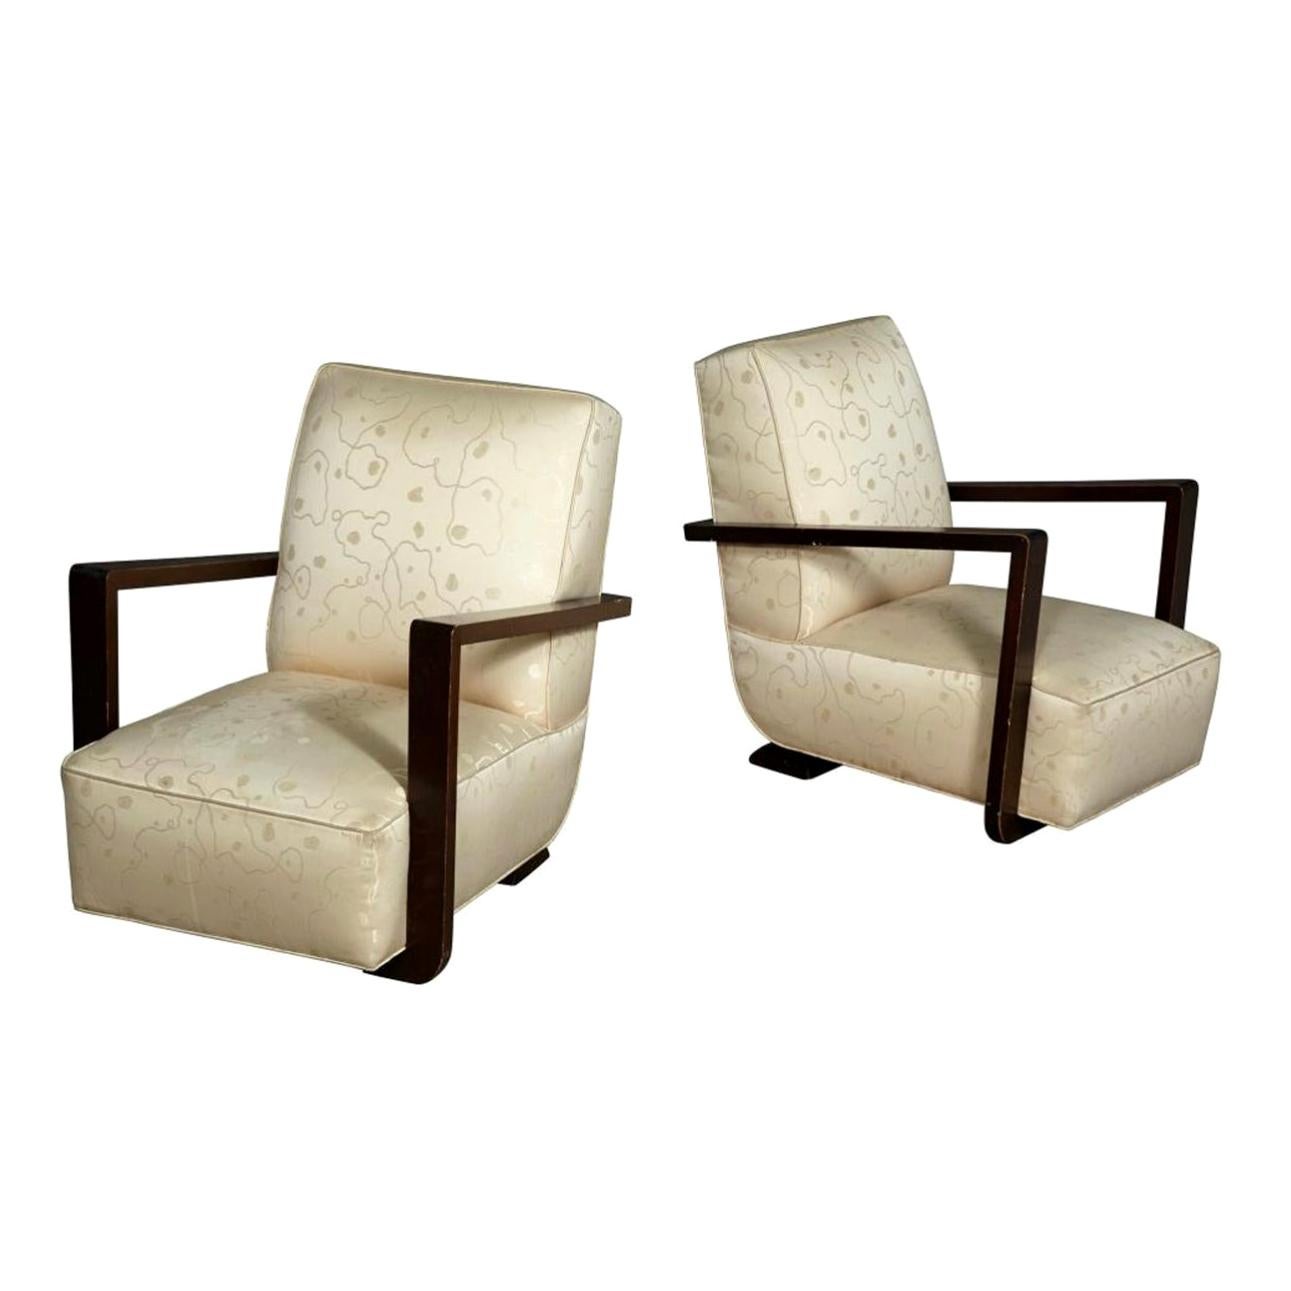 Pair of Art Deco Sculptural Lounge Armchairs